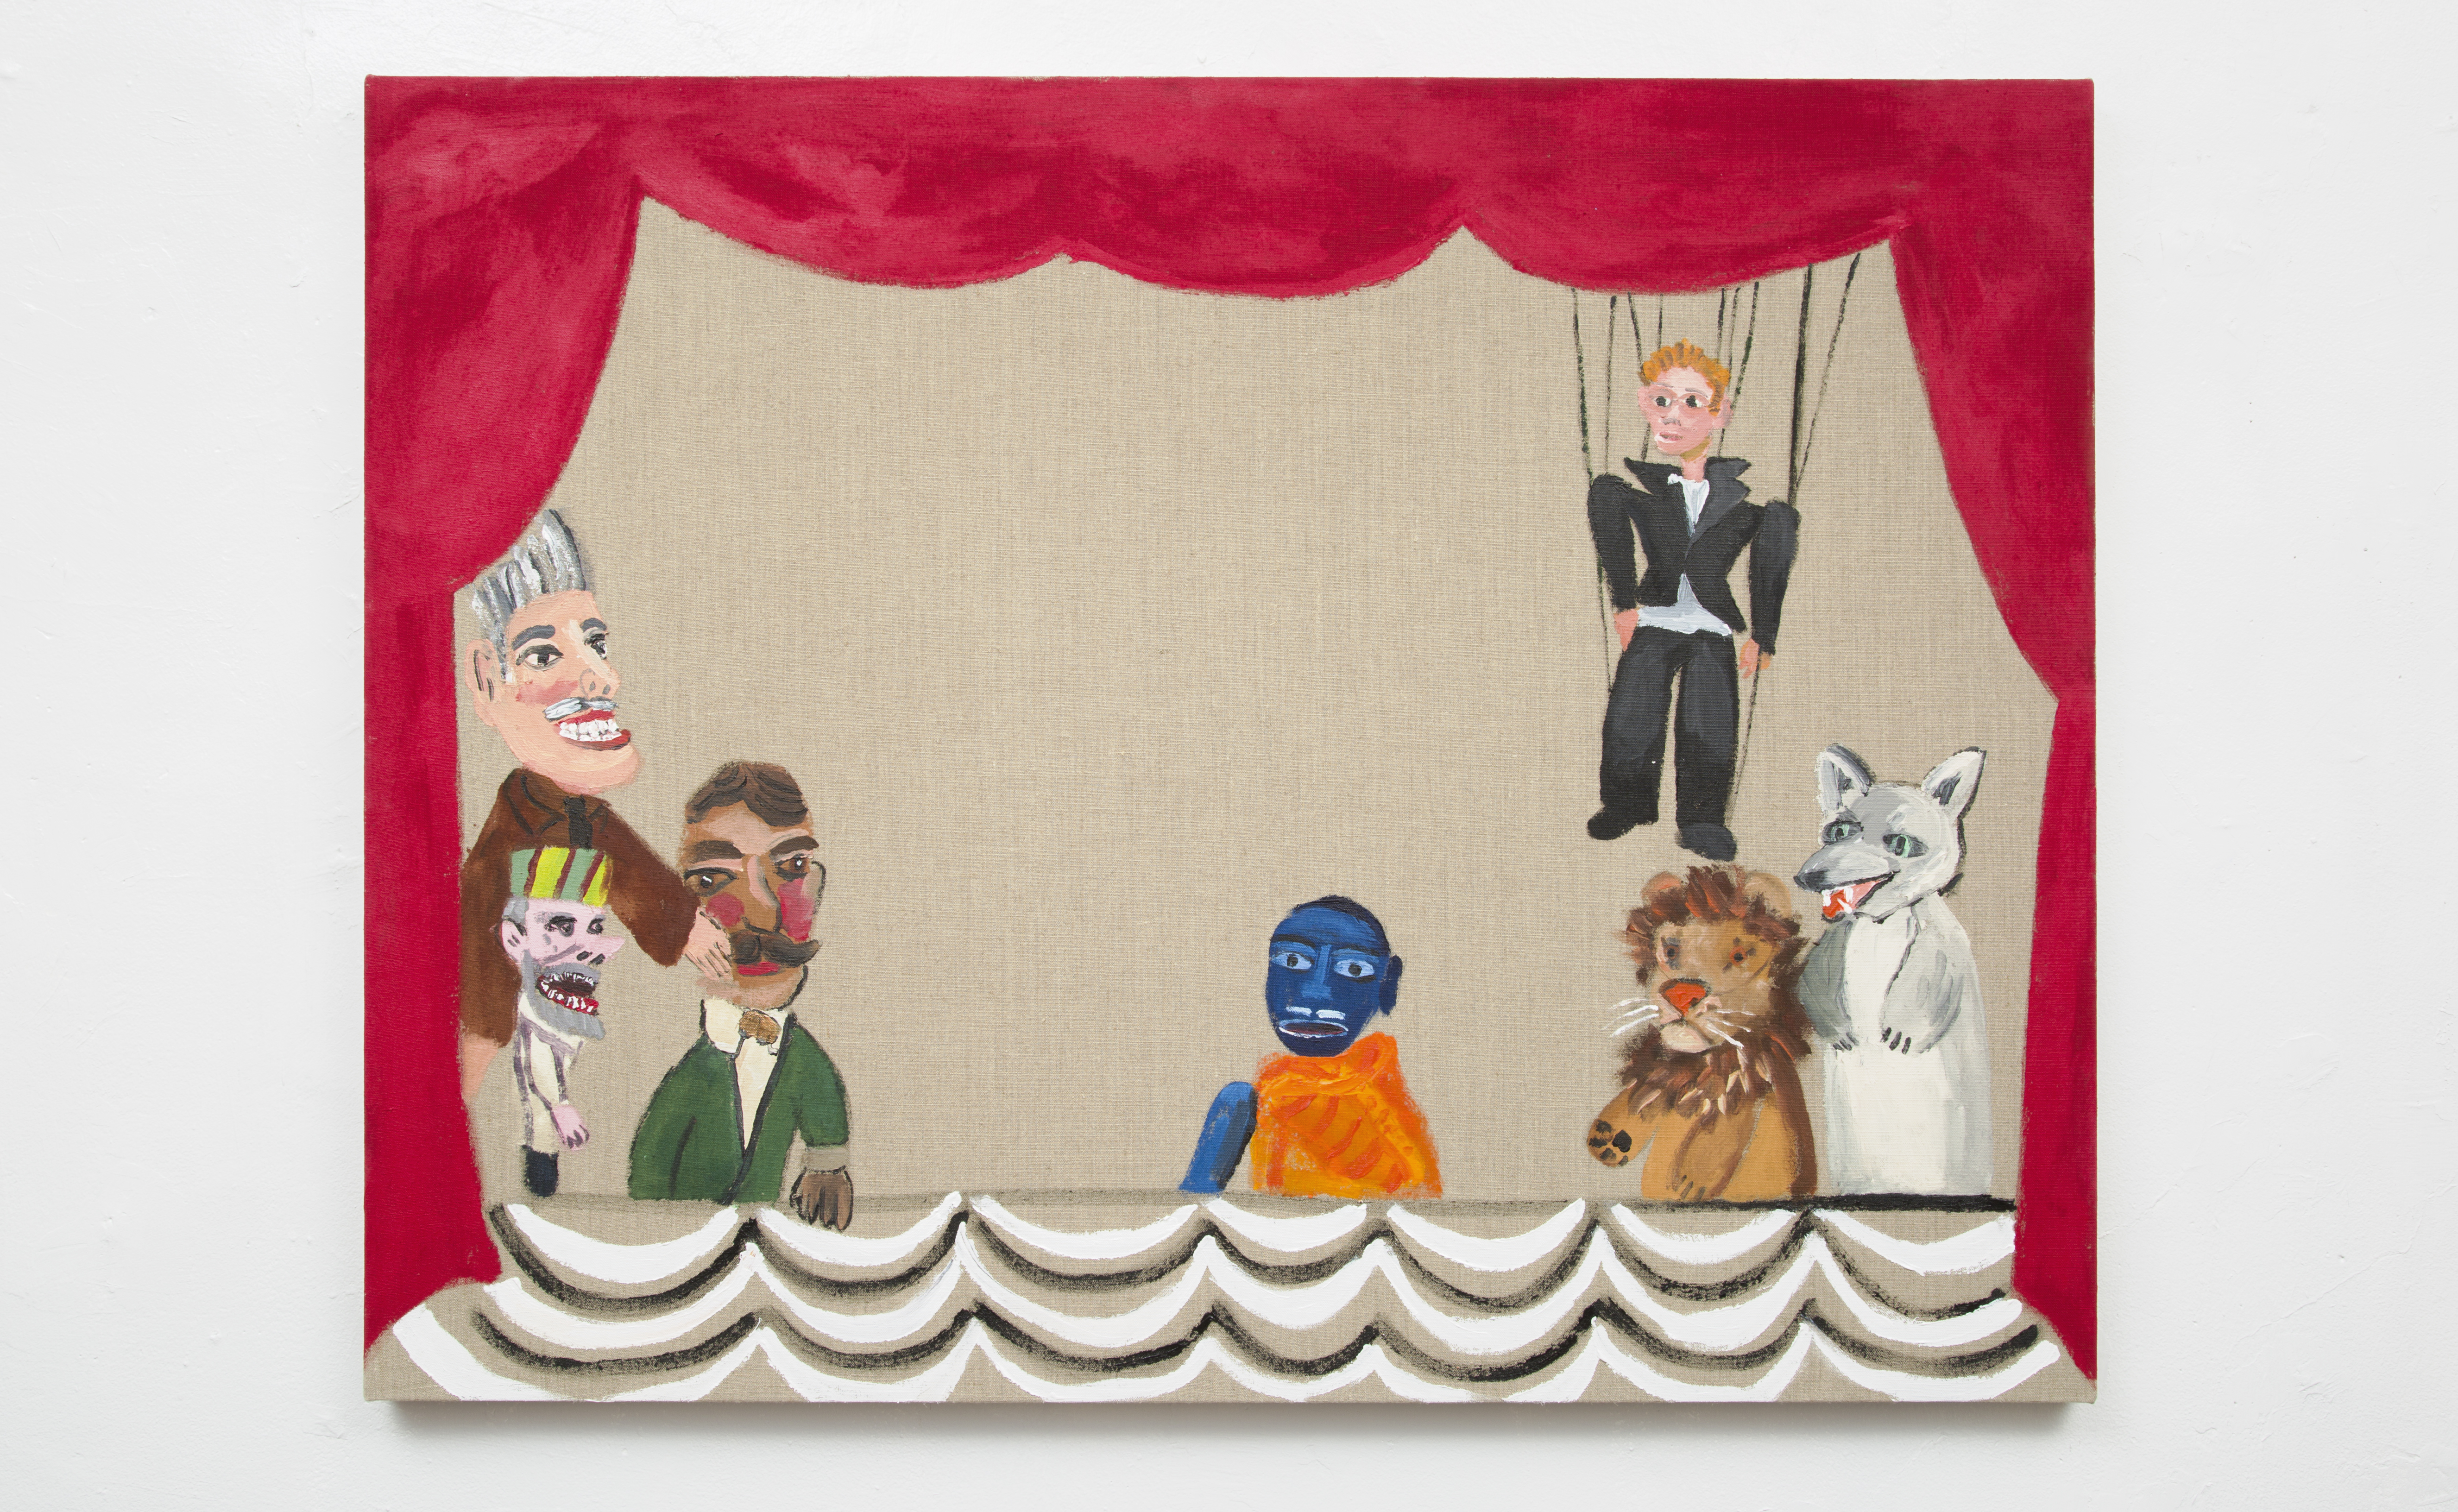 Tabboo! Puppet Show, 2017 on view at Western Exhibitions. Acrylic on linen 32 x 42 inches.